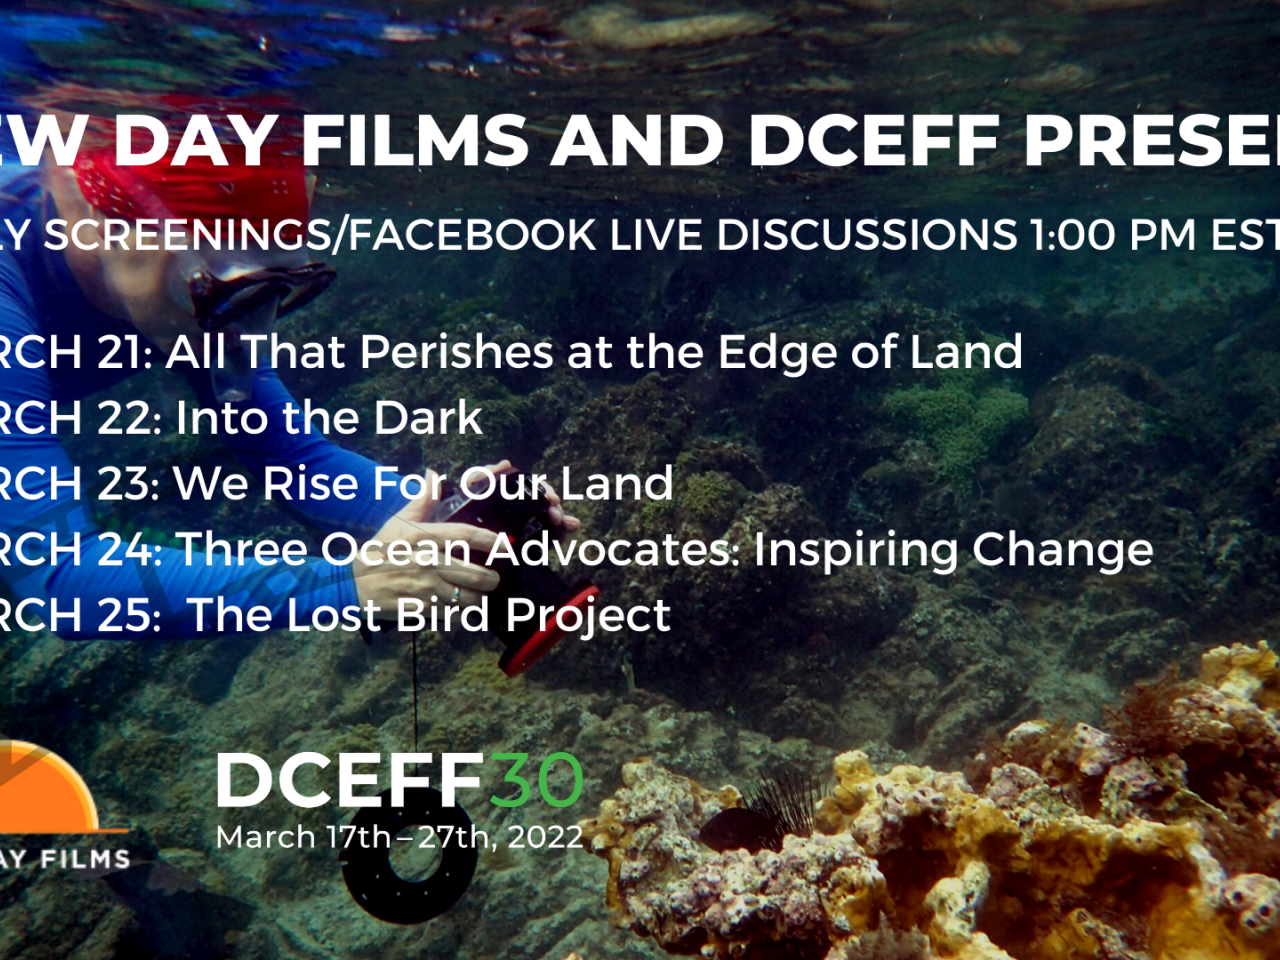 In the background, a woman is scuba diving under water and holding a camera pointed at a shell or coral reef. On top of the image is text detailing the schedule for the New Day Films/DCEFF Film Festival.